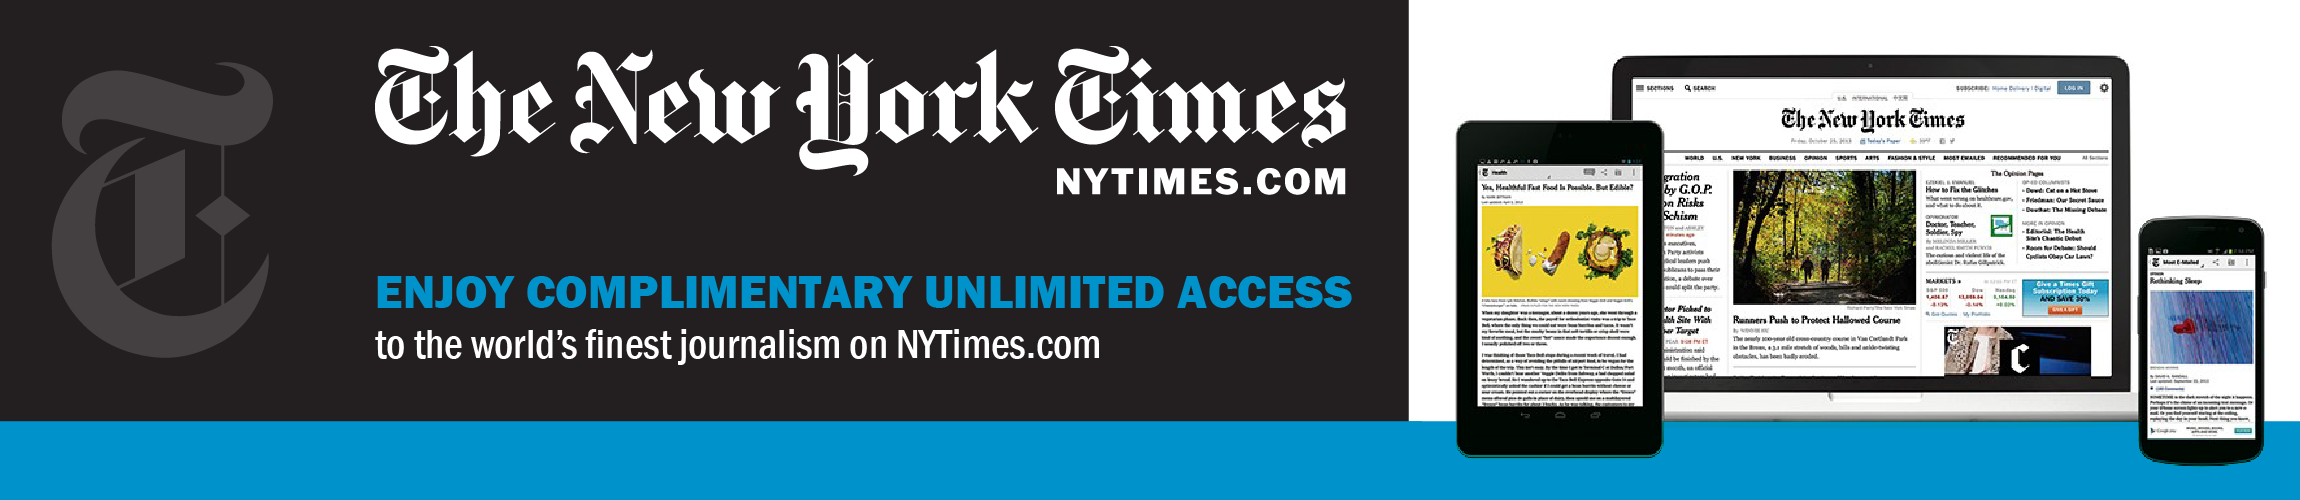 The New York Times (NYTimes.com): Enjoy complimentary unlimited access to the world's finest journalism on NYTimes.com the world's 